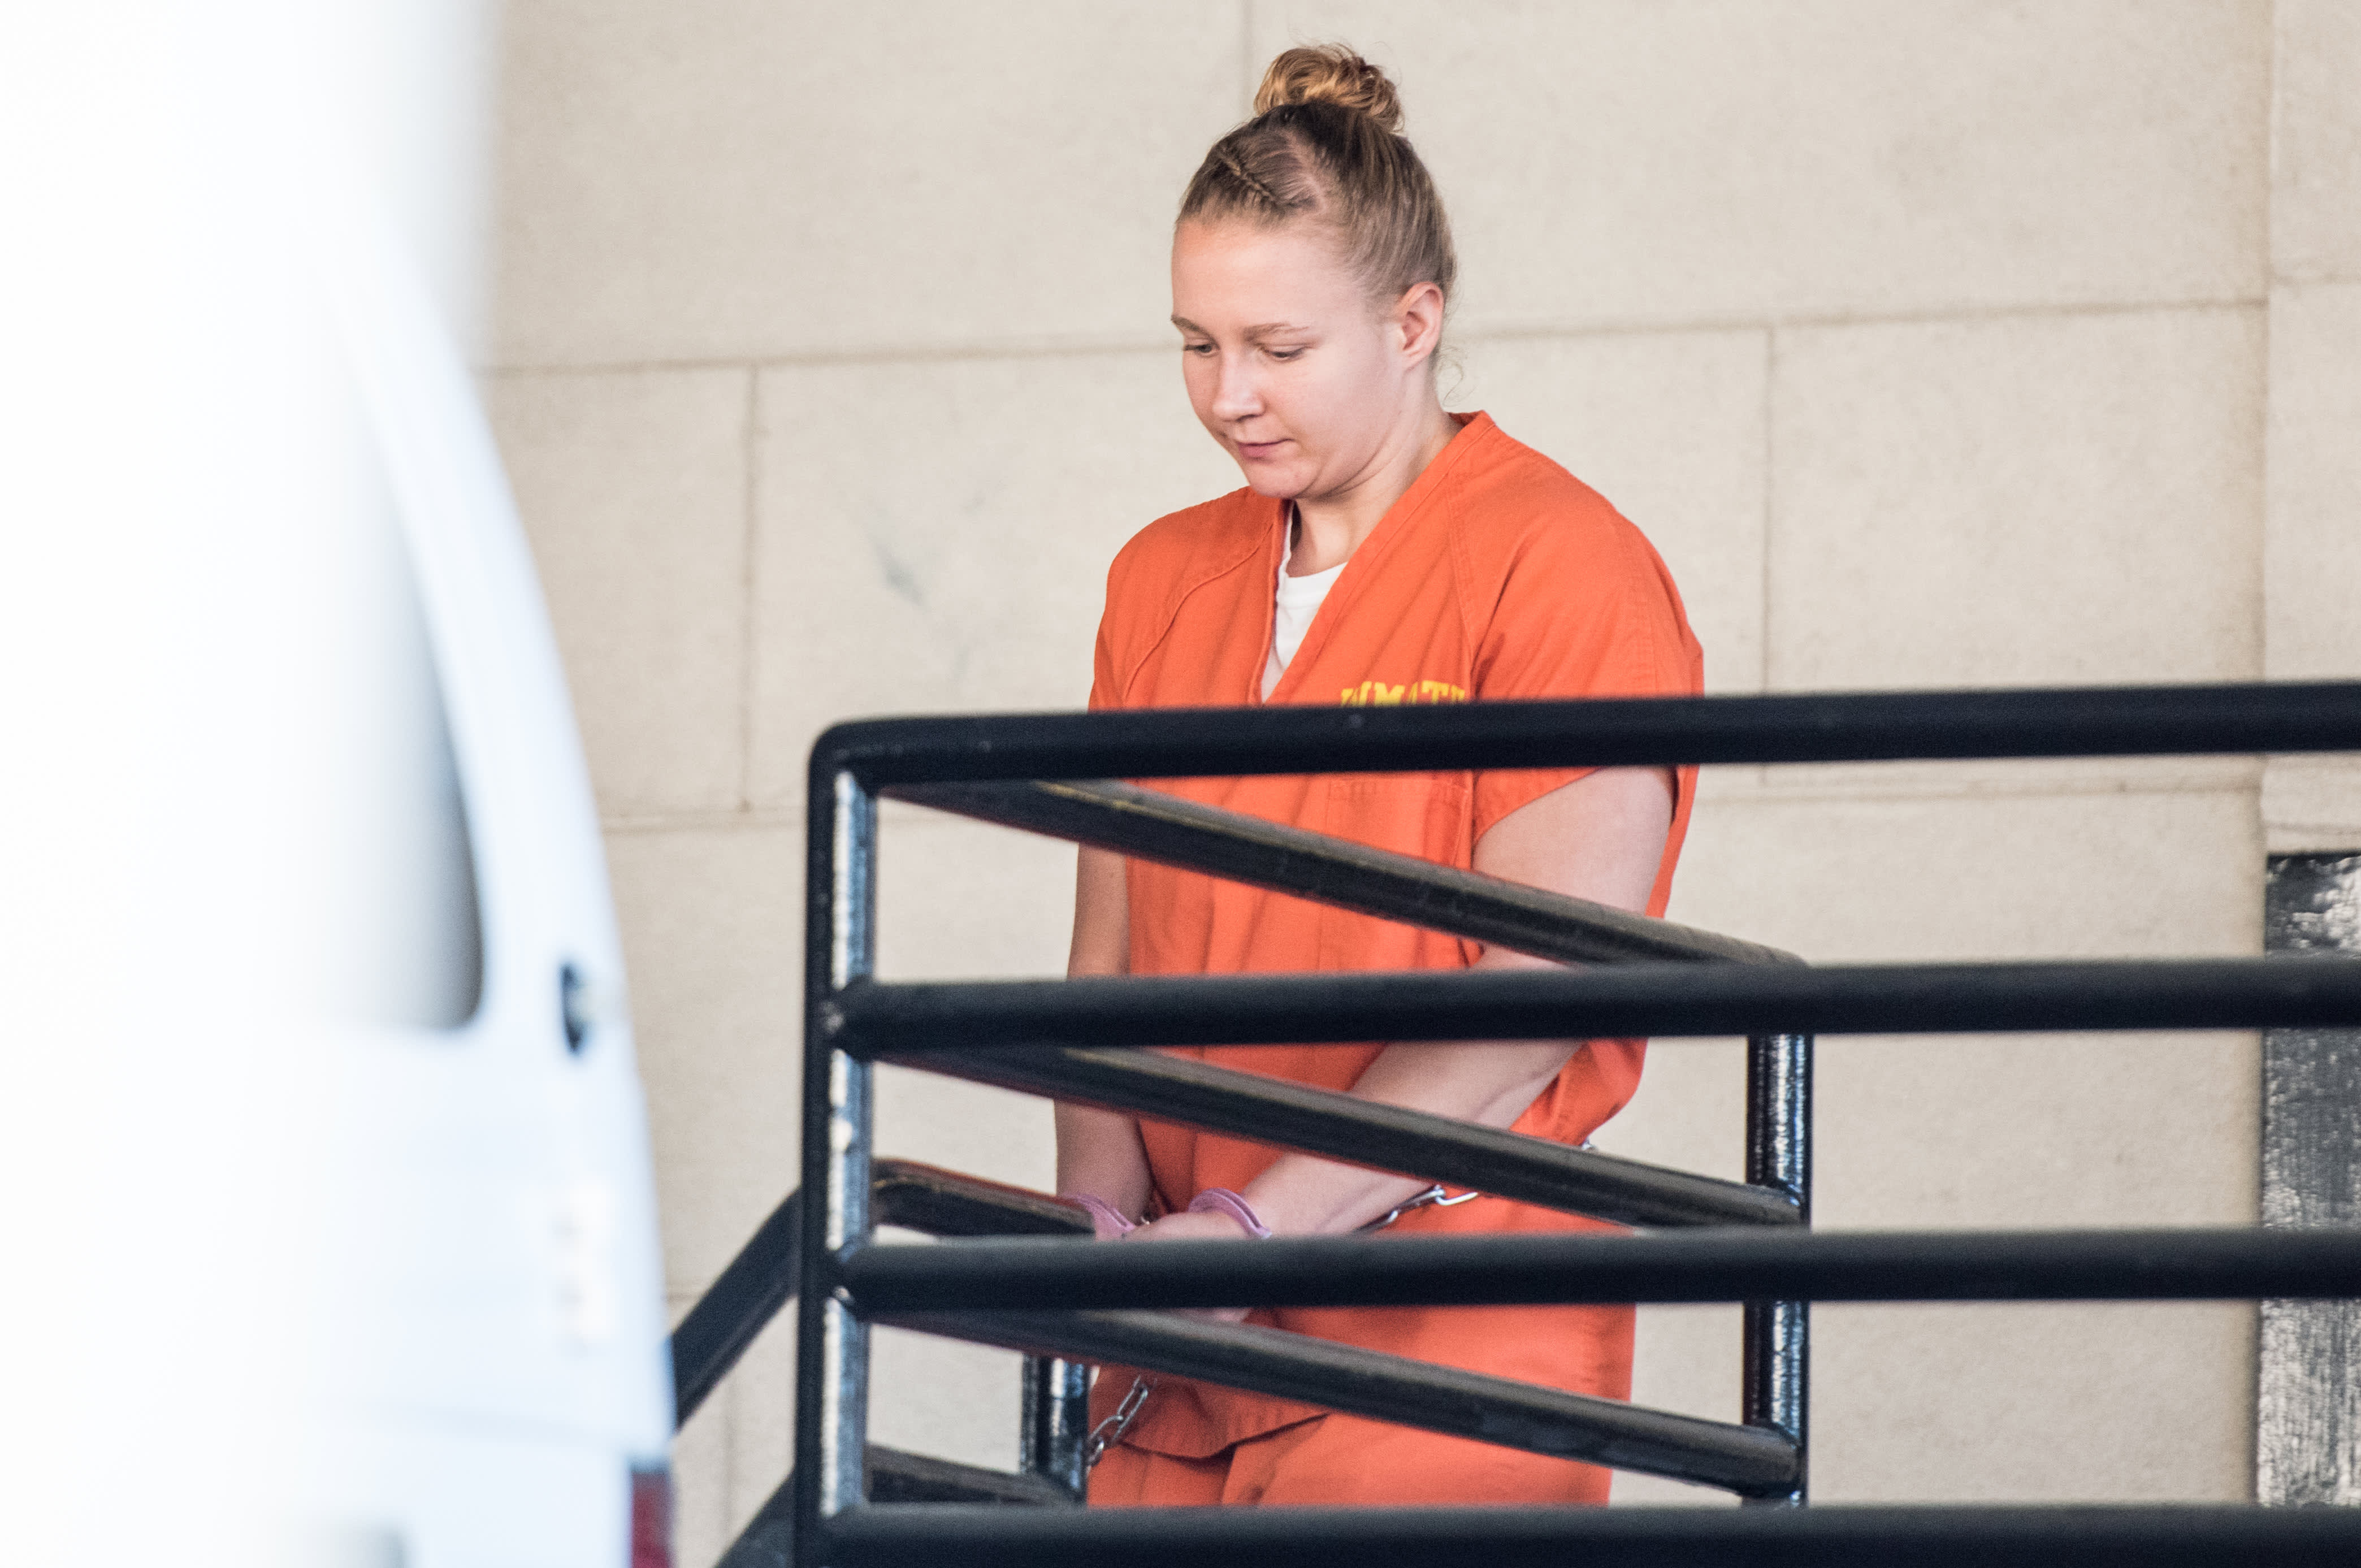 Reality Winner, who leaked intelligence on Russian election interference, released from prison